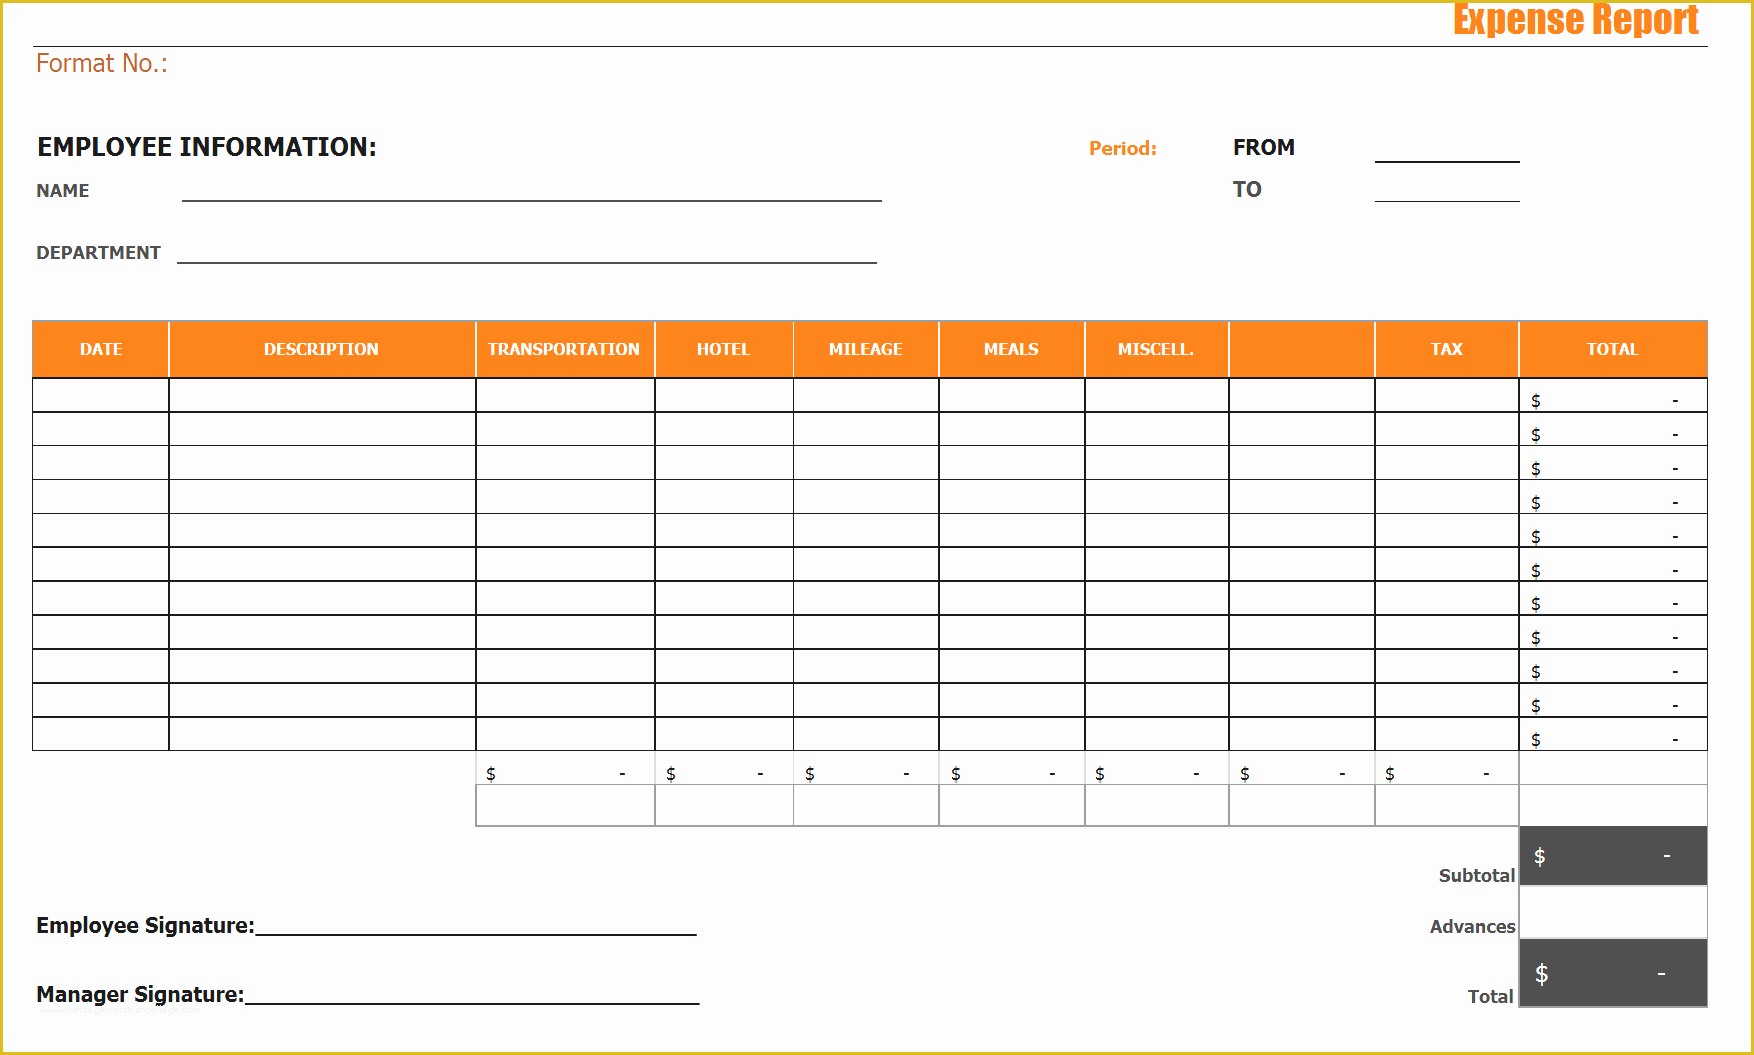 Free Expense Report Template Of Blank Expense Report Mughals